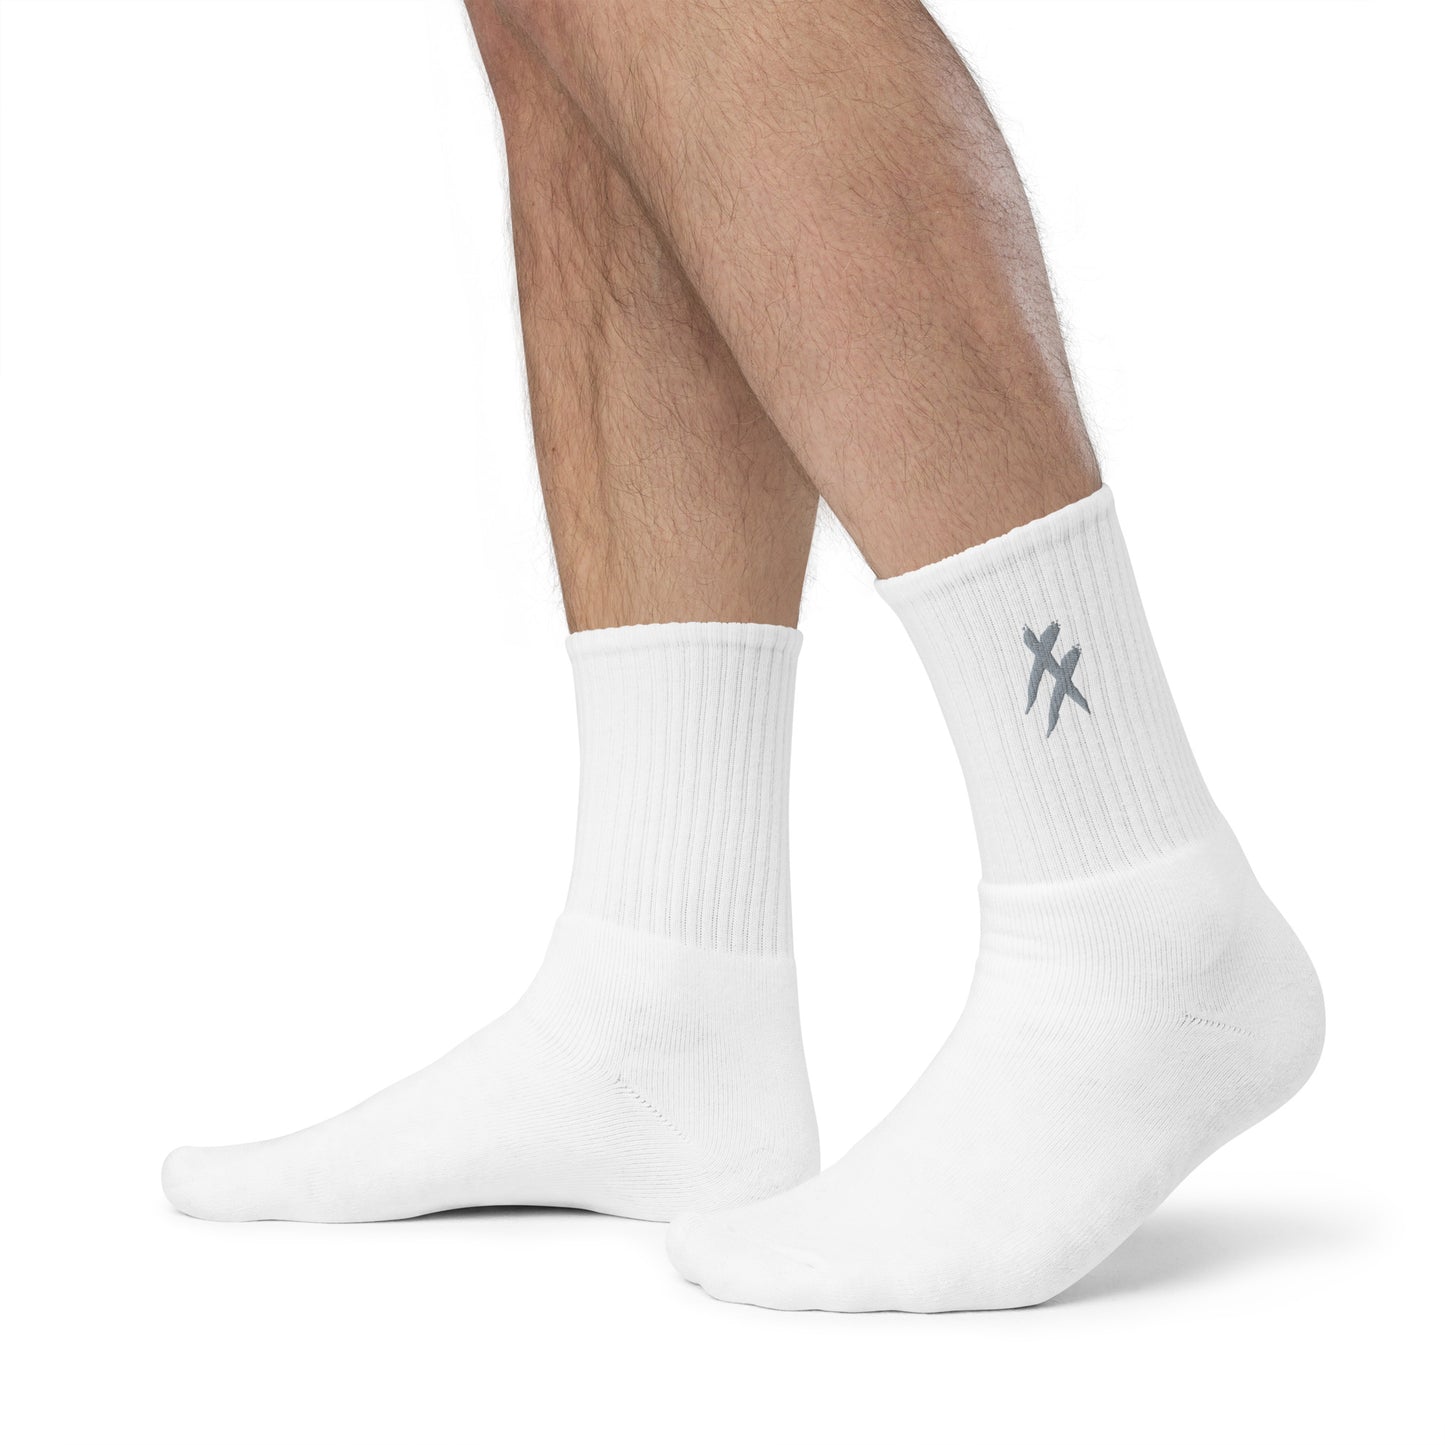 Silver X's - Embroidered socks